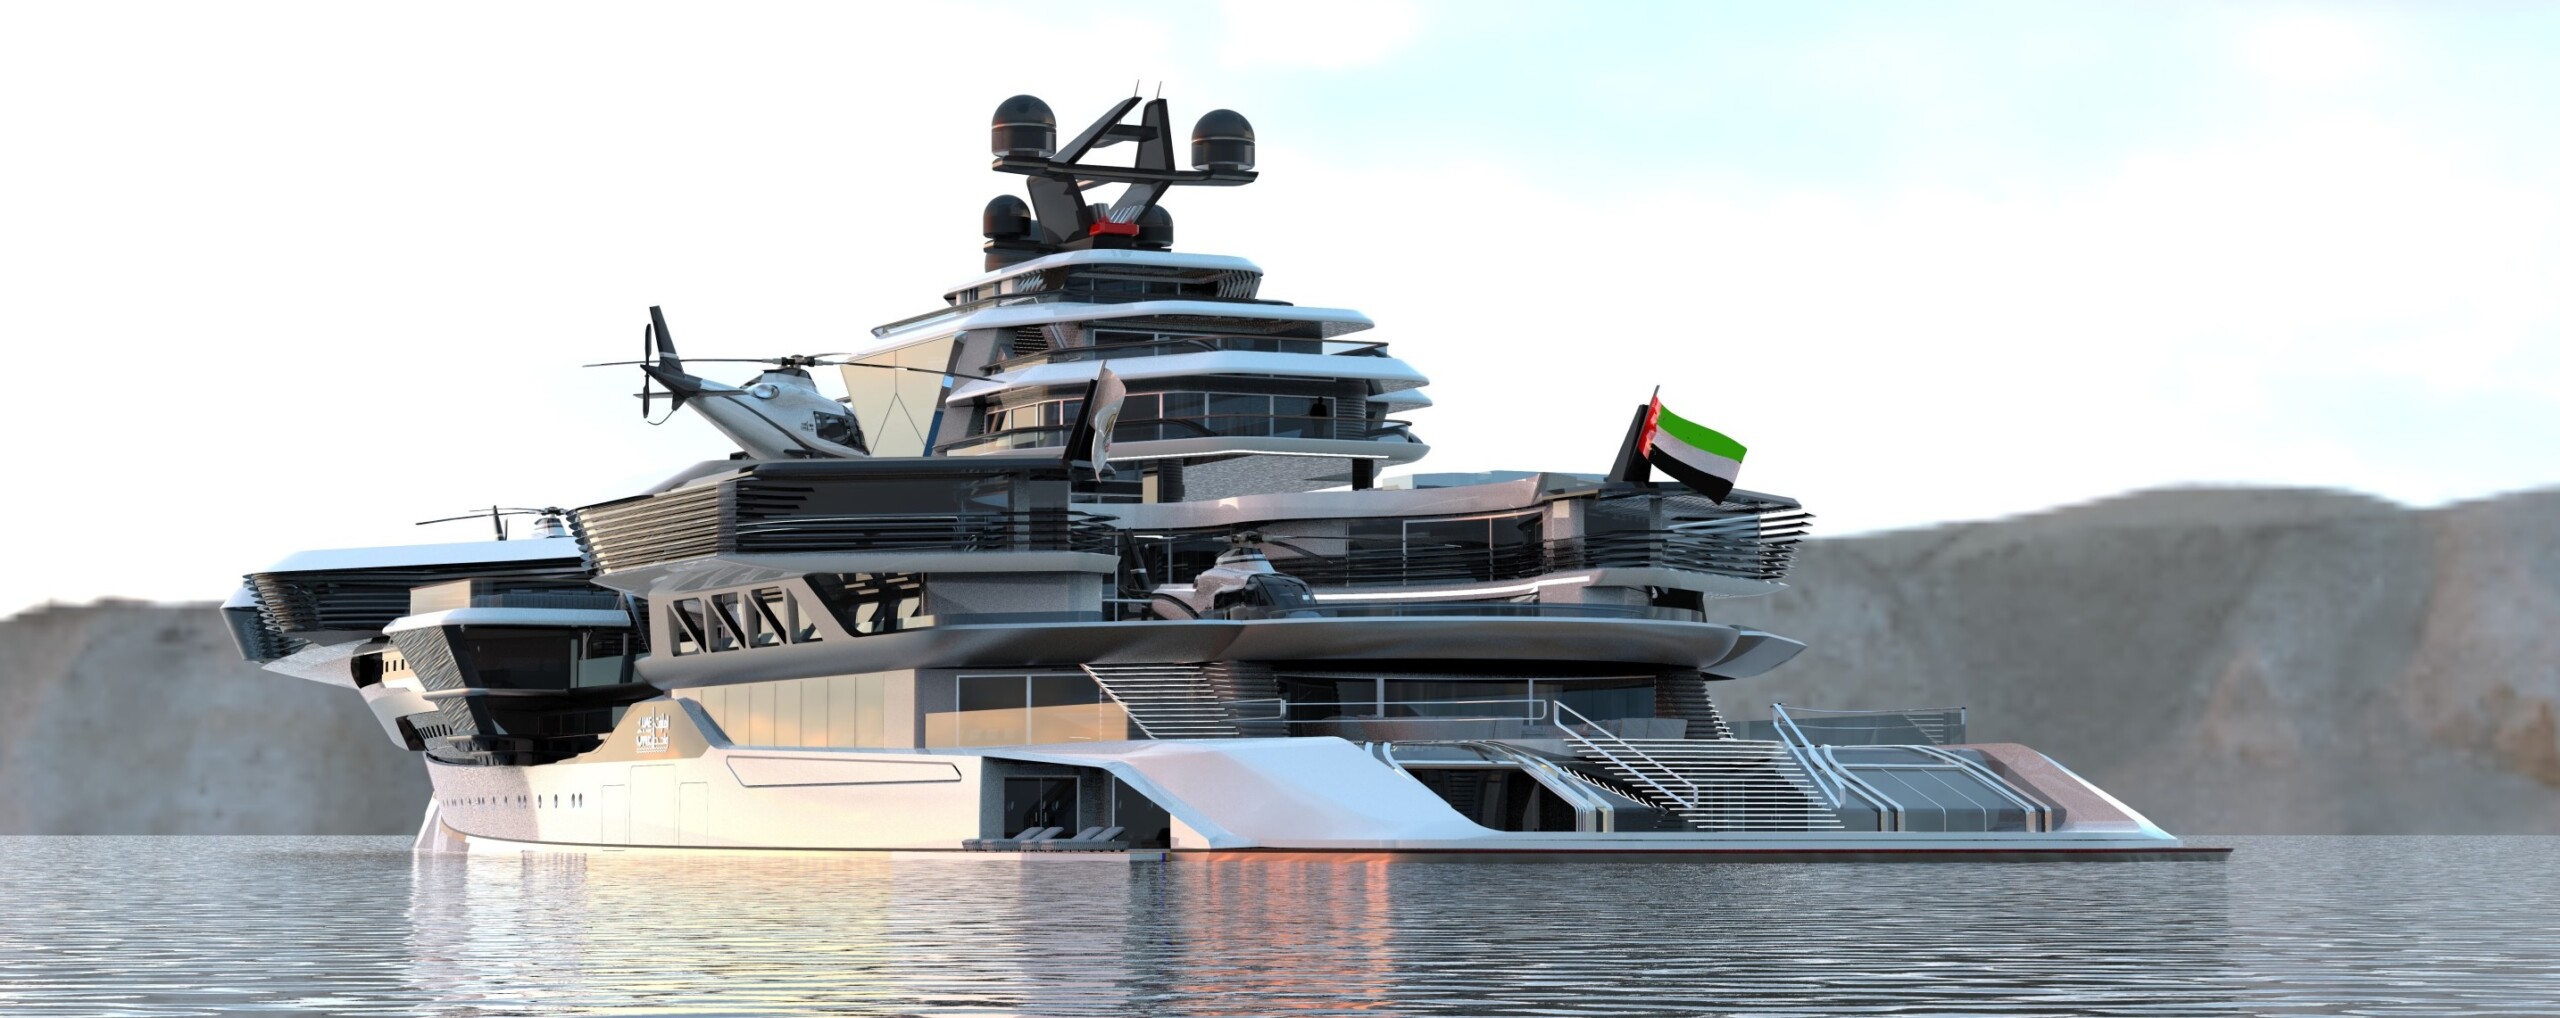 us aircraft carrier inspired uae one megayacht is so big it could be its own country 223637 1 scaled